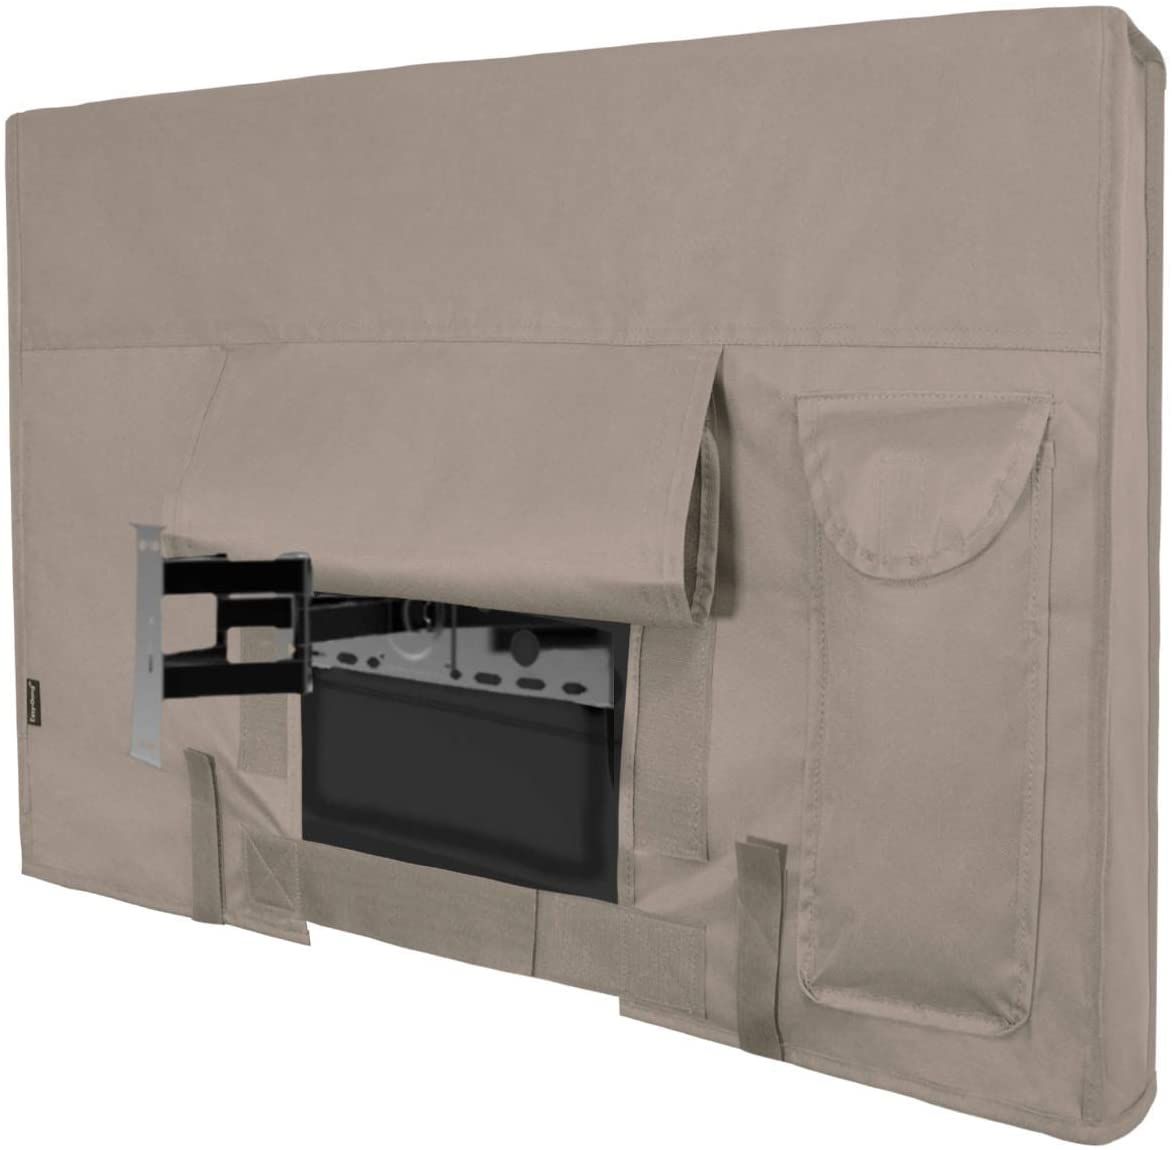 Easy-Going Outdoor TV Cover - $$title$$